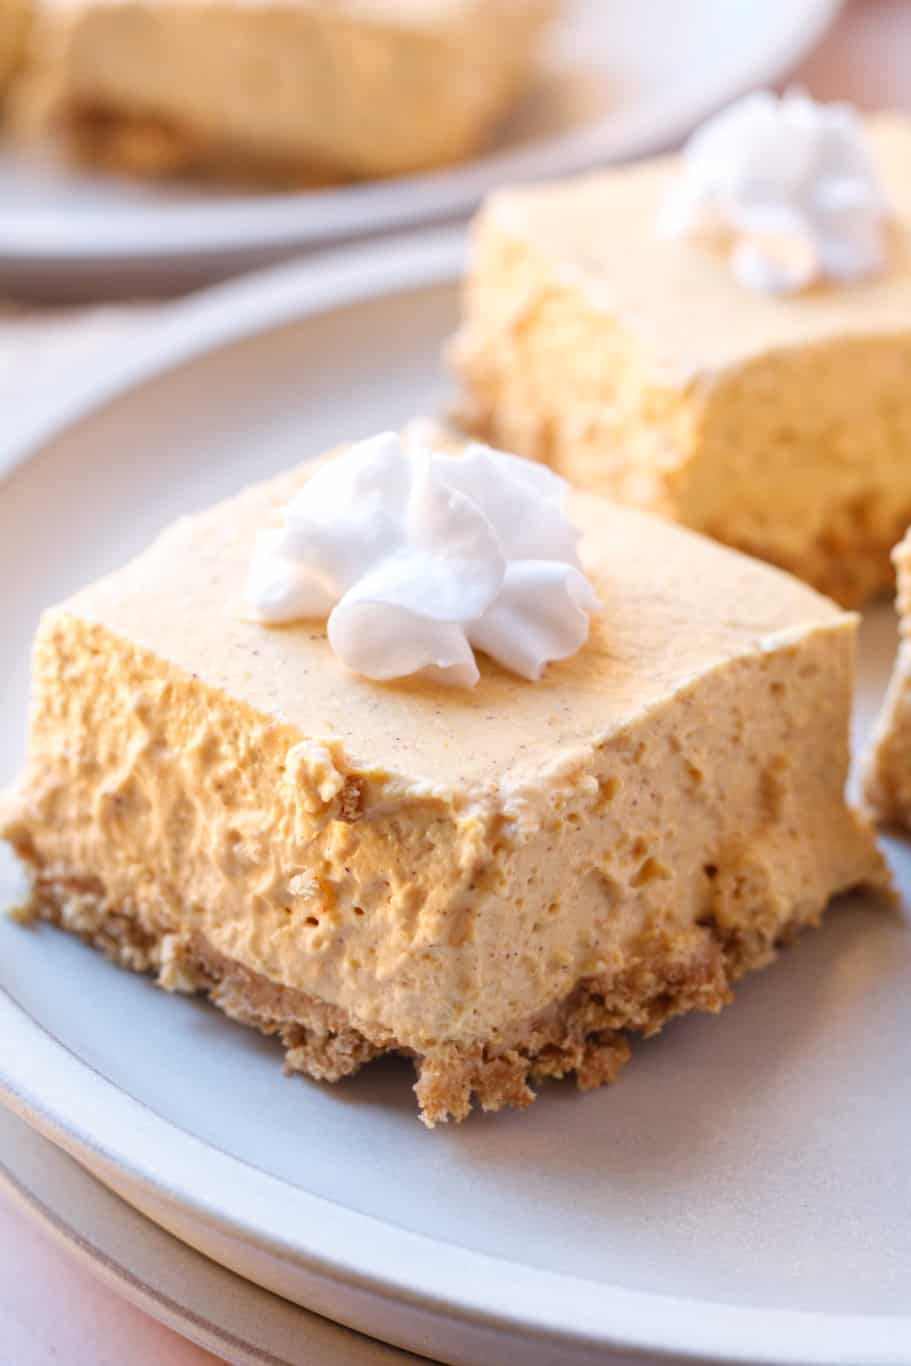 Tasty mini desserts made up of graham cracker crust and cheesecake filling.